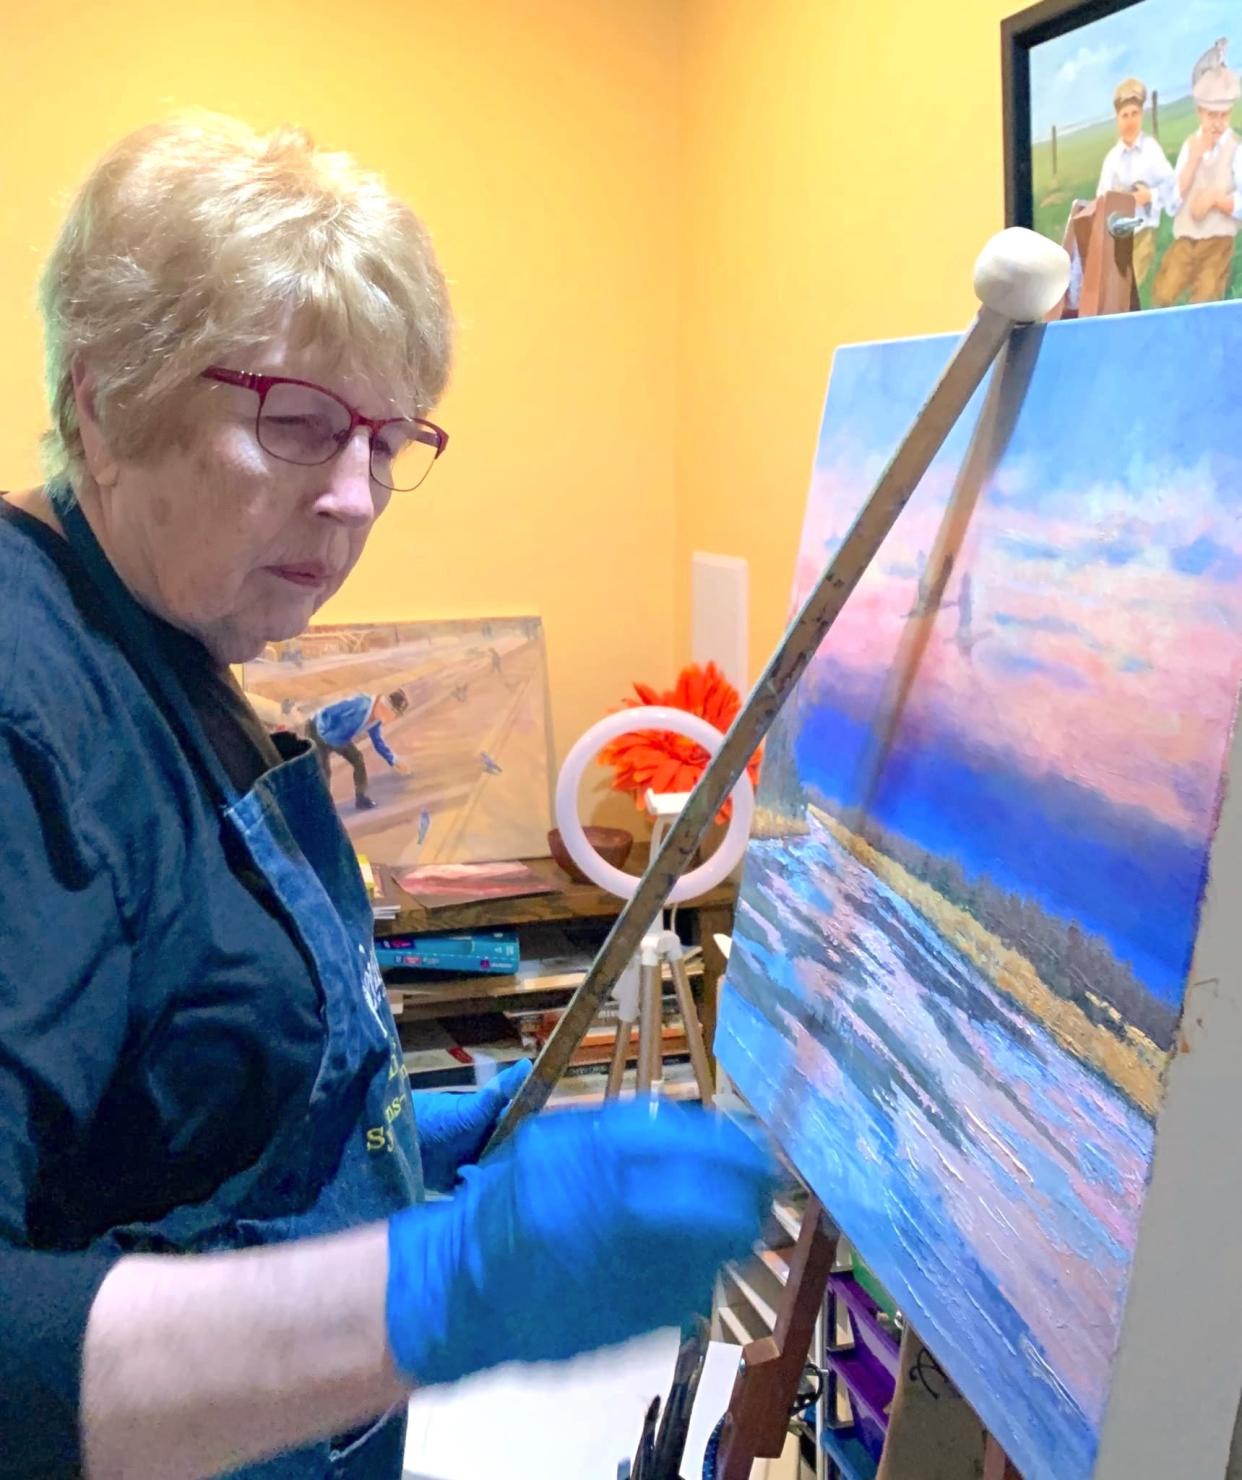 Plien air is painting what an artist sees and is often done outdoors. Doris Symens-Armstrong is also skilled in creating artwork within her at-home studio in Watertown.